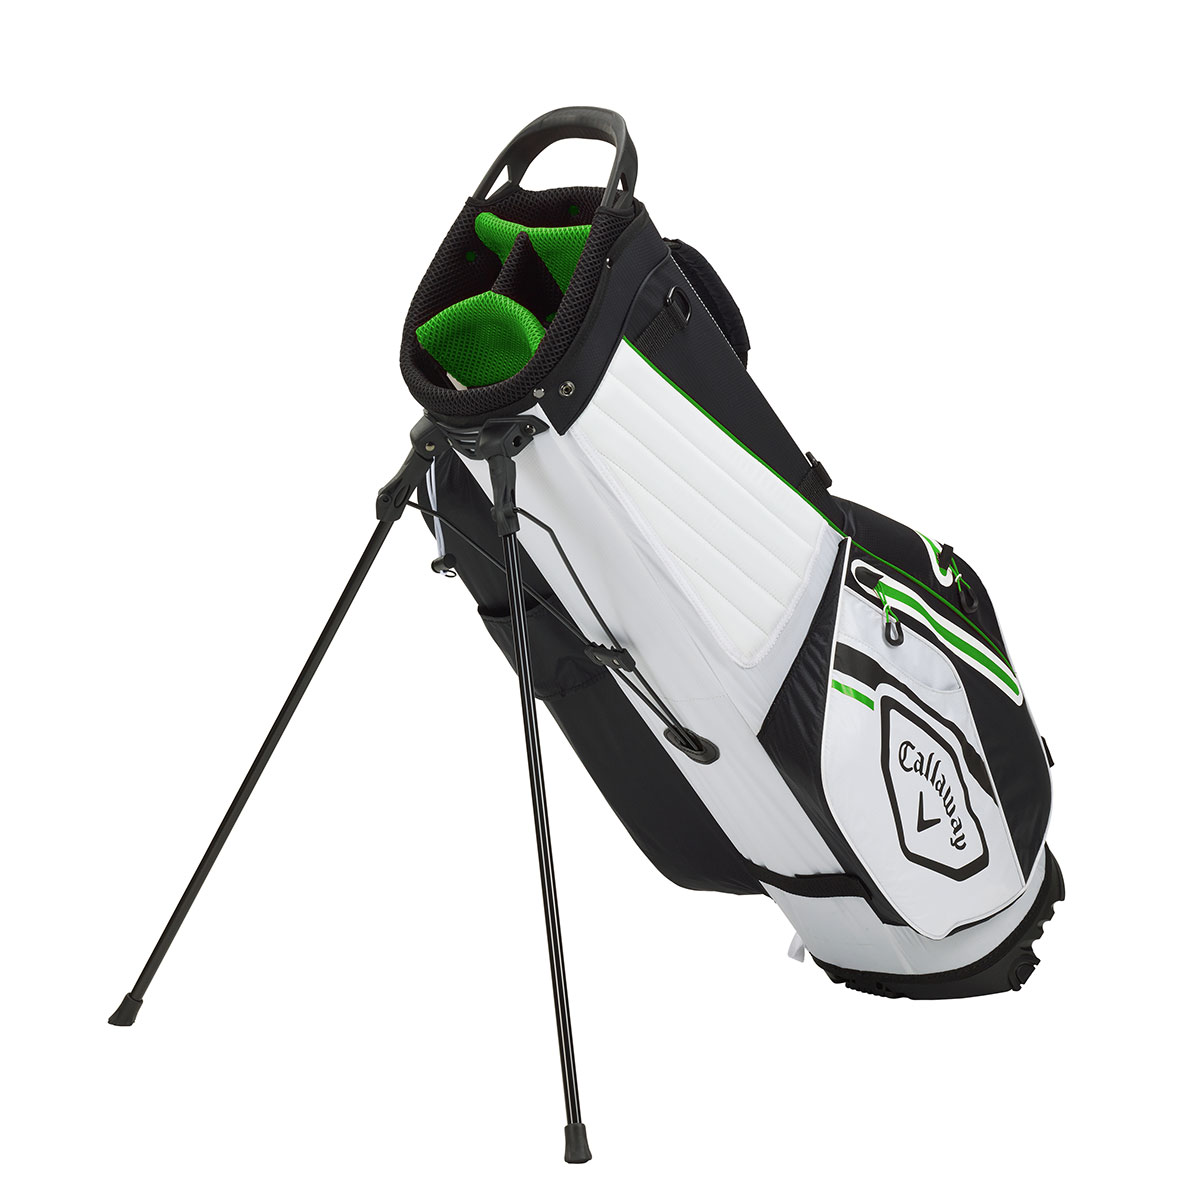 Callaway Golf Chev Dry Stand Bag from american golf